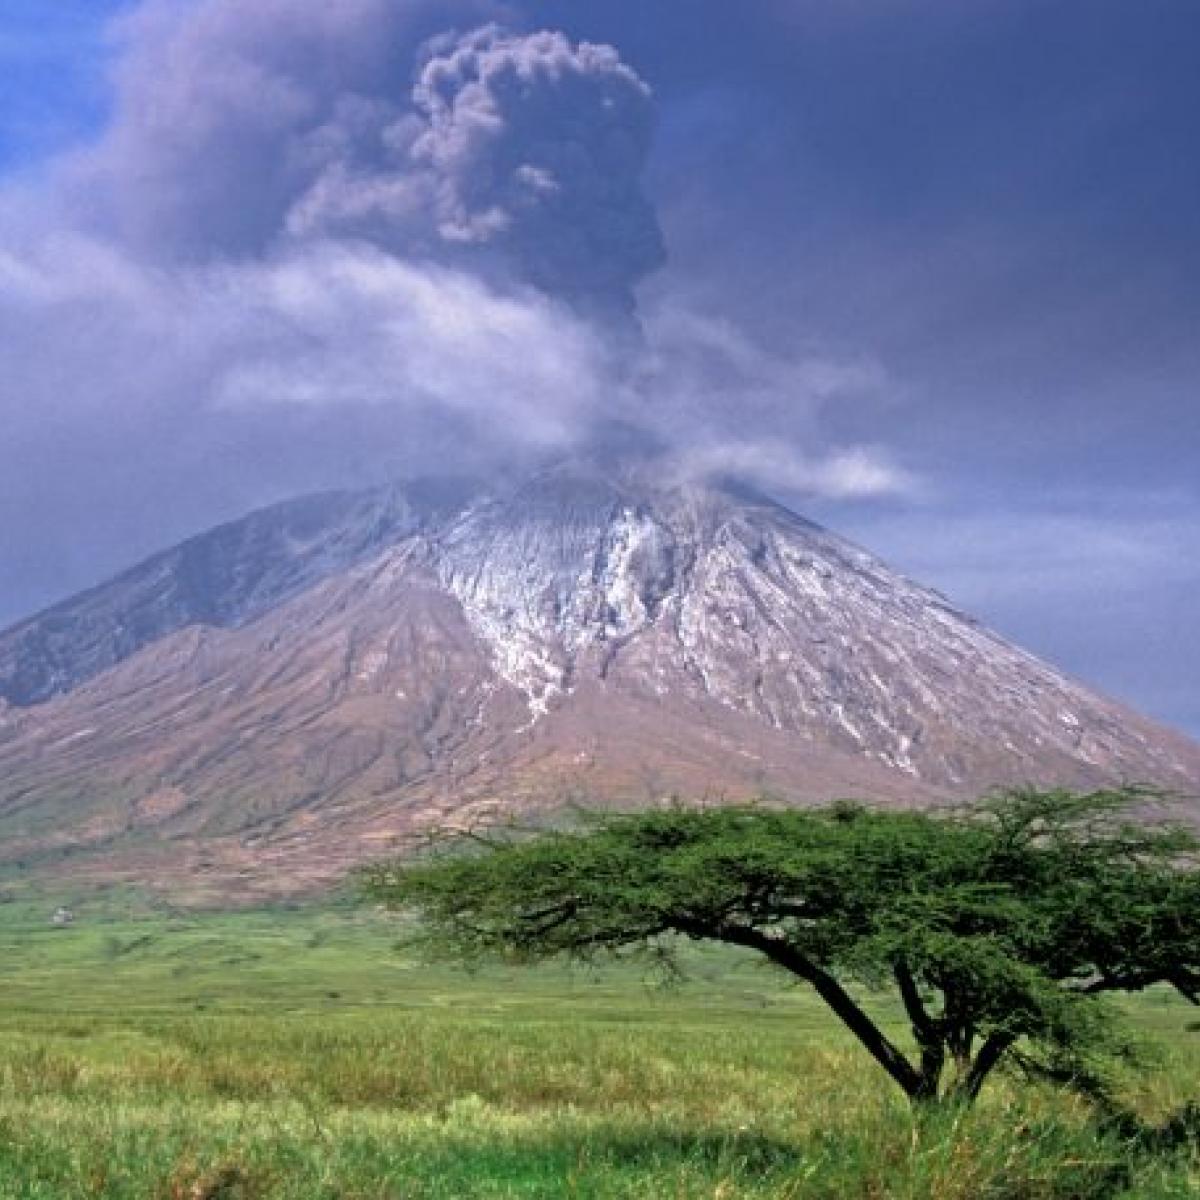 Ol Dionyo Lengai Volcano means “Mountain of God” in local Maasia language.